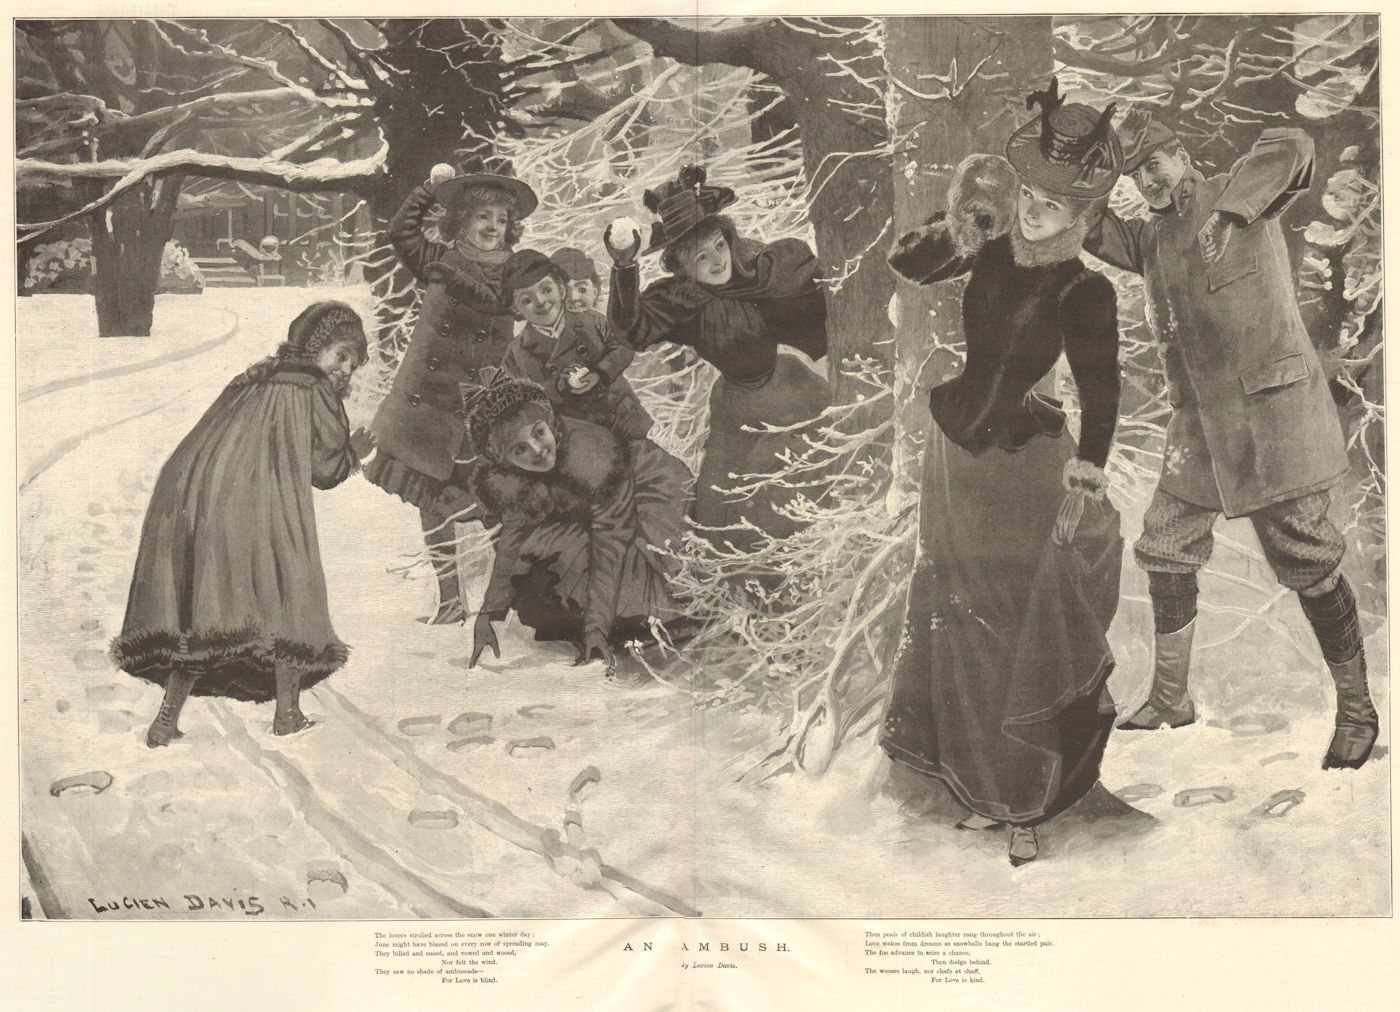 Associate Product An ambush. Winter Sports. Family Snowball fight 1897 antique ILN full page